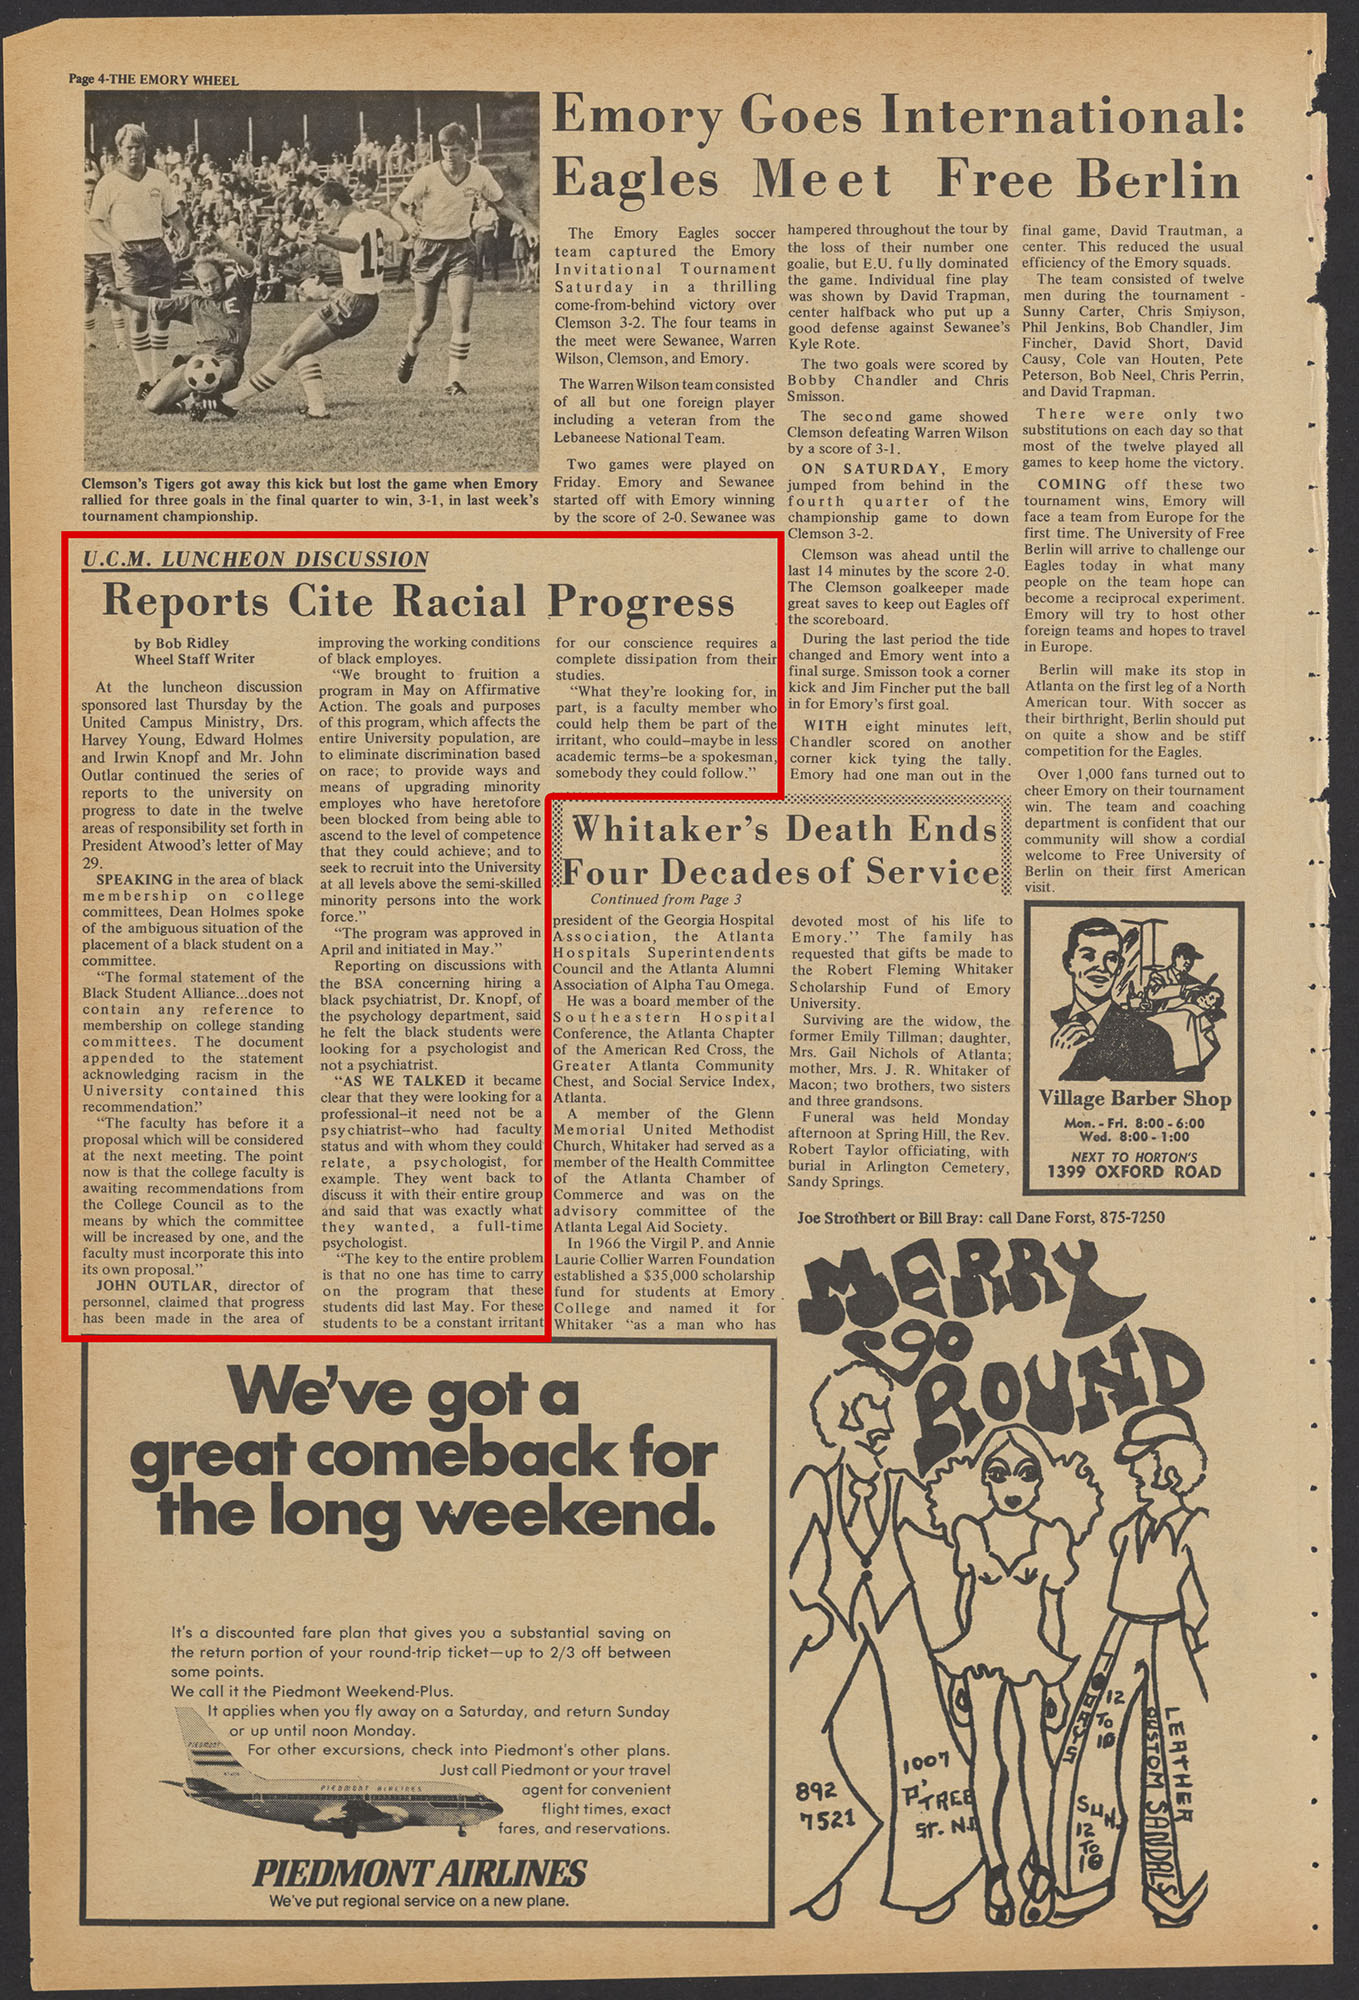 Emory Wheel newspaper page with article on a Black student proposal progress report meeting